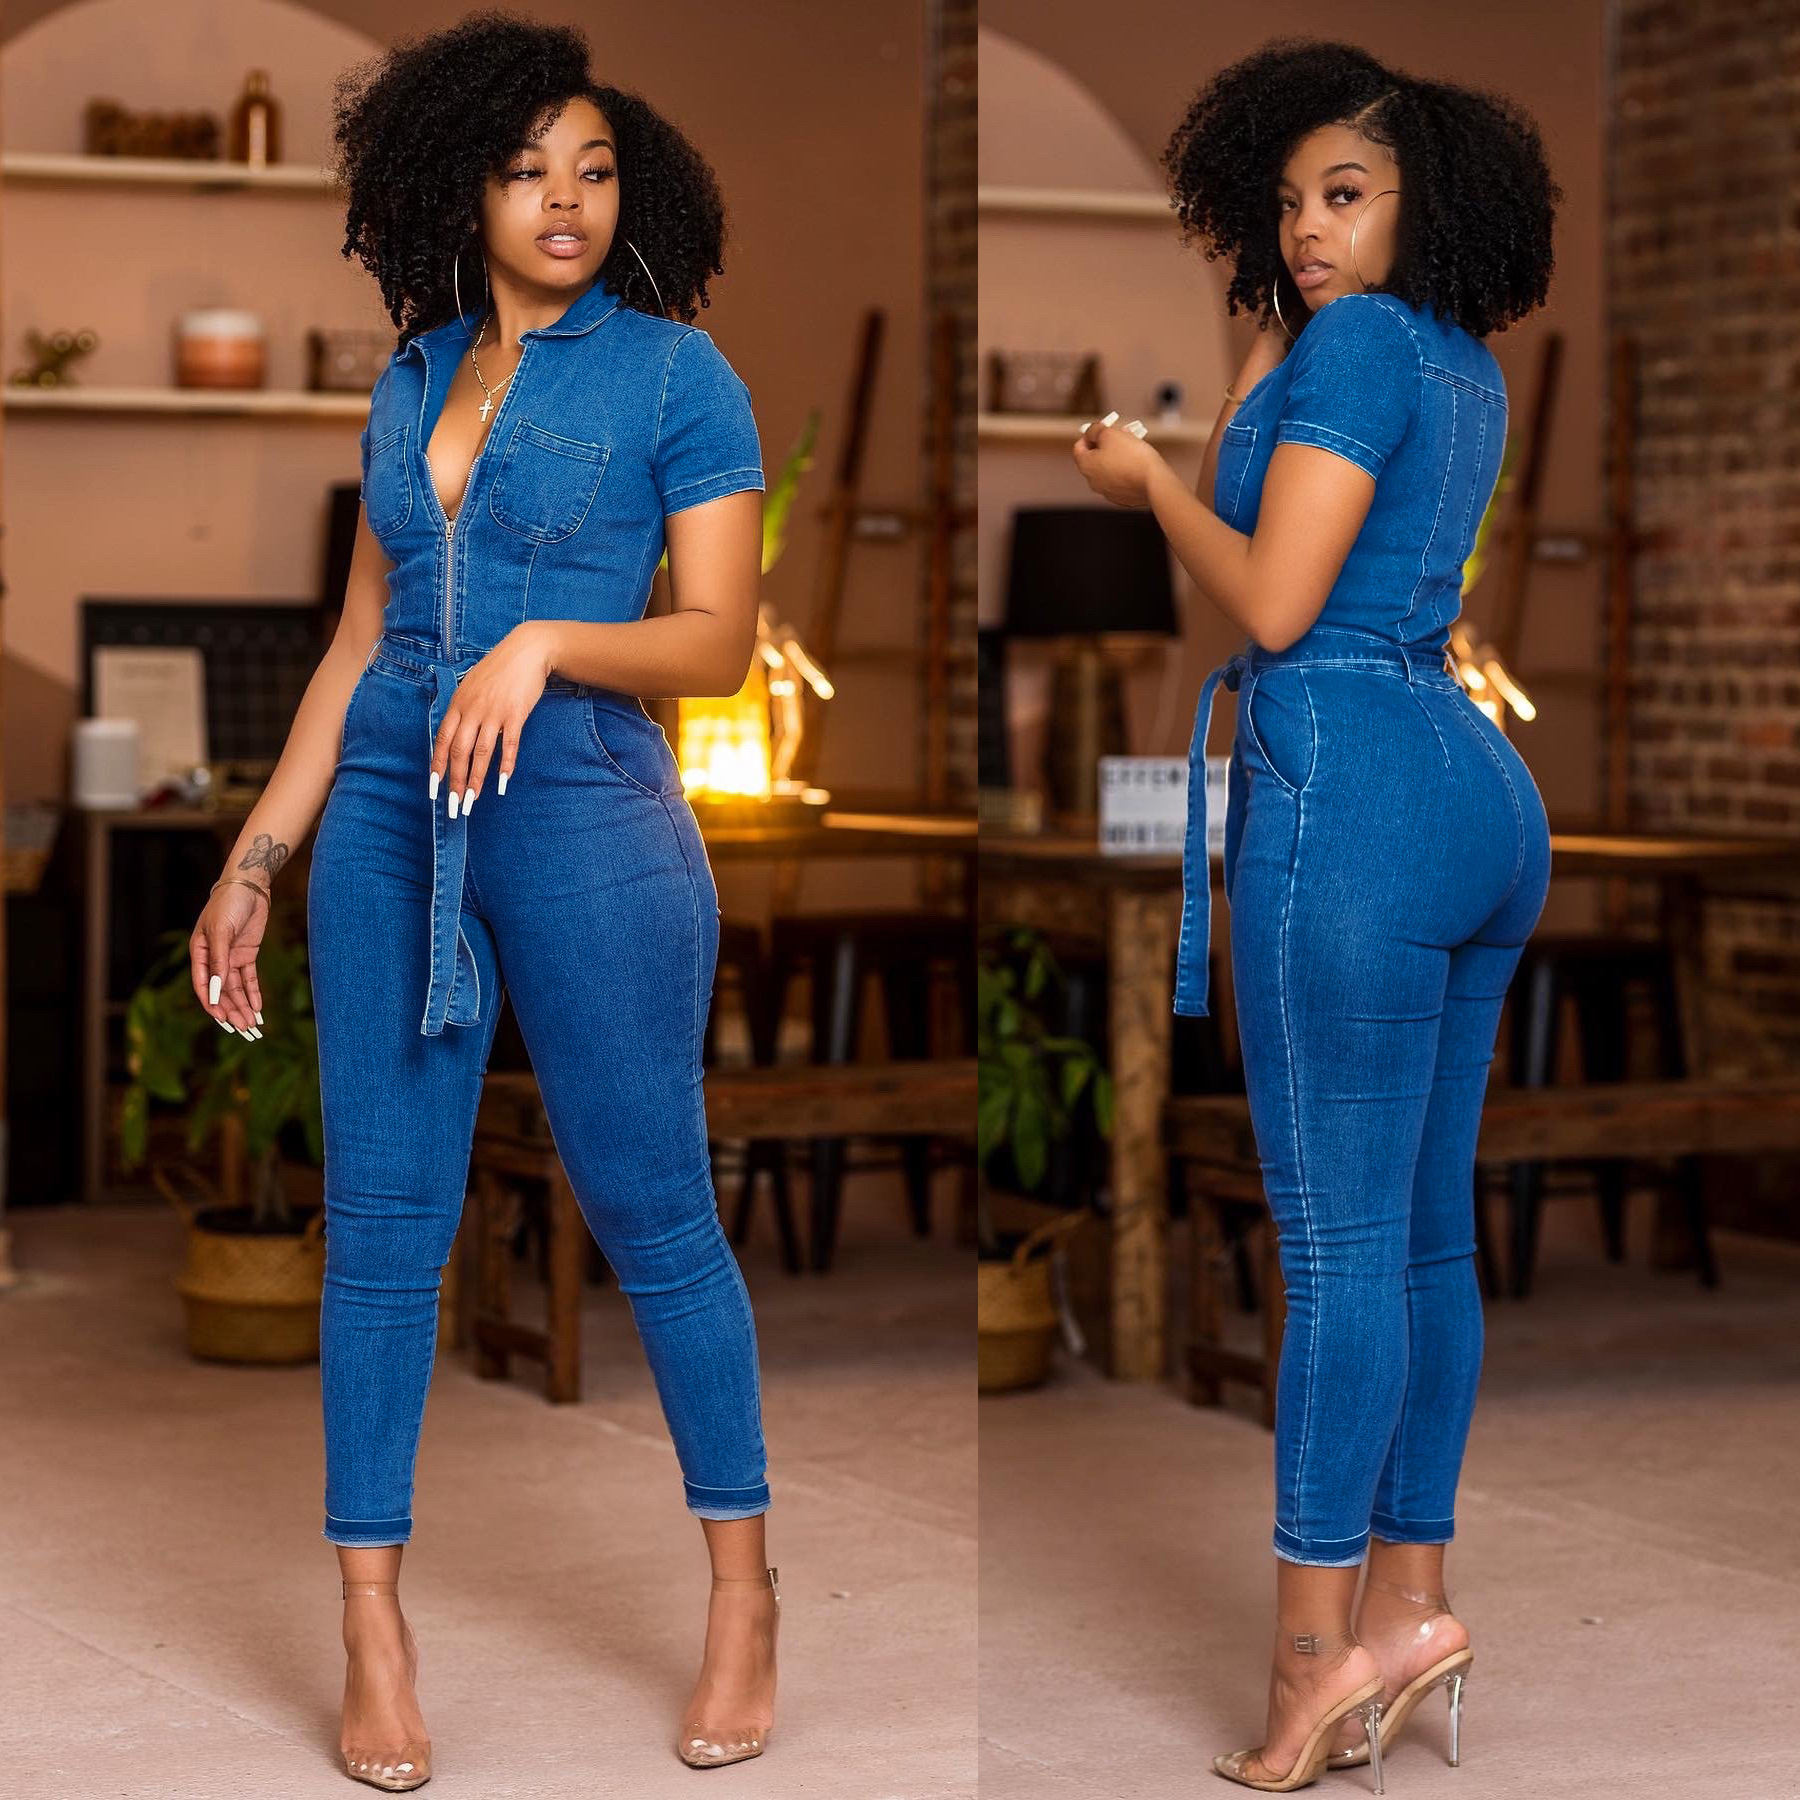 Denim jumpsuit women are versatile and stylish wardrobe essentials that can be dressed up or down for various occasions.